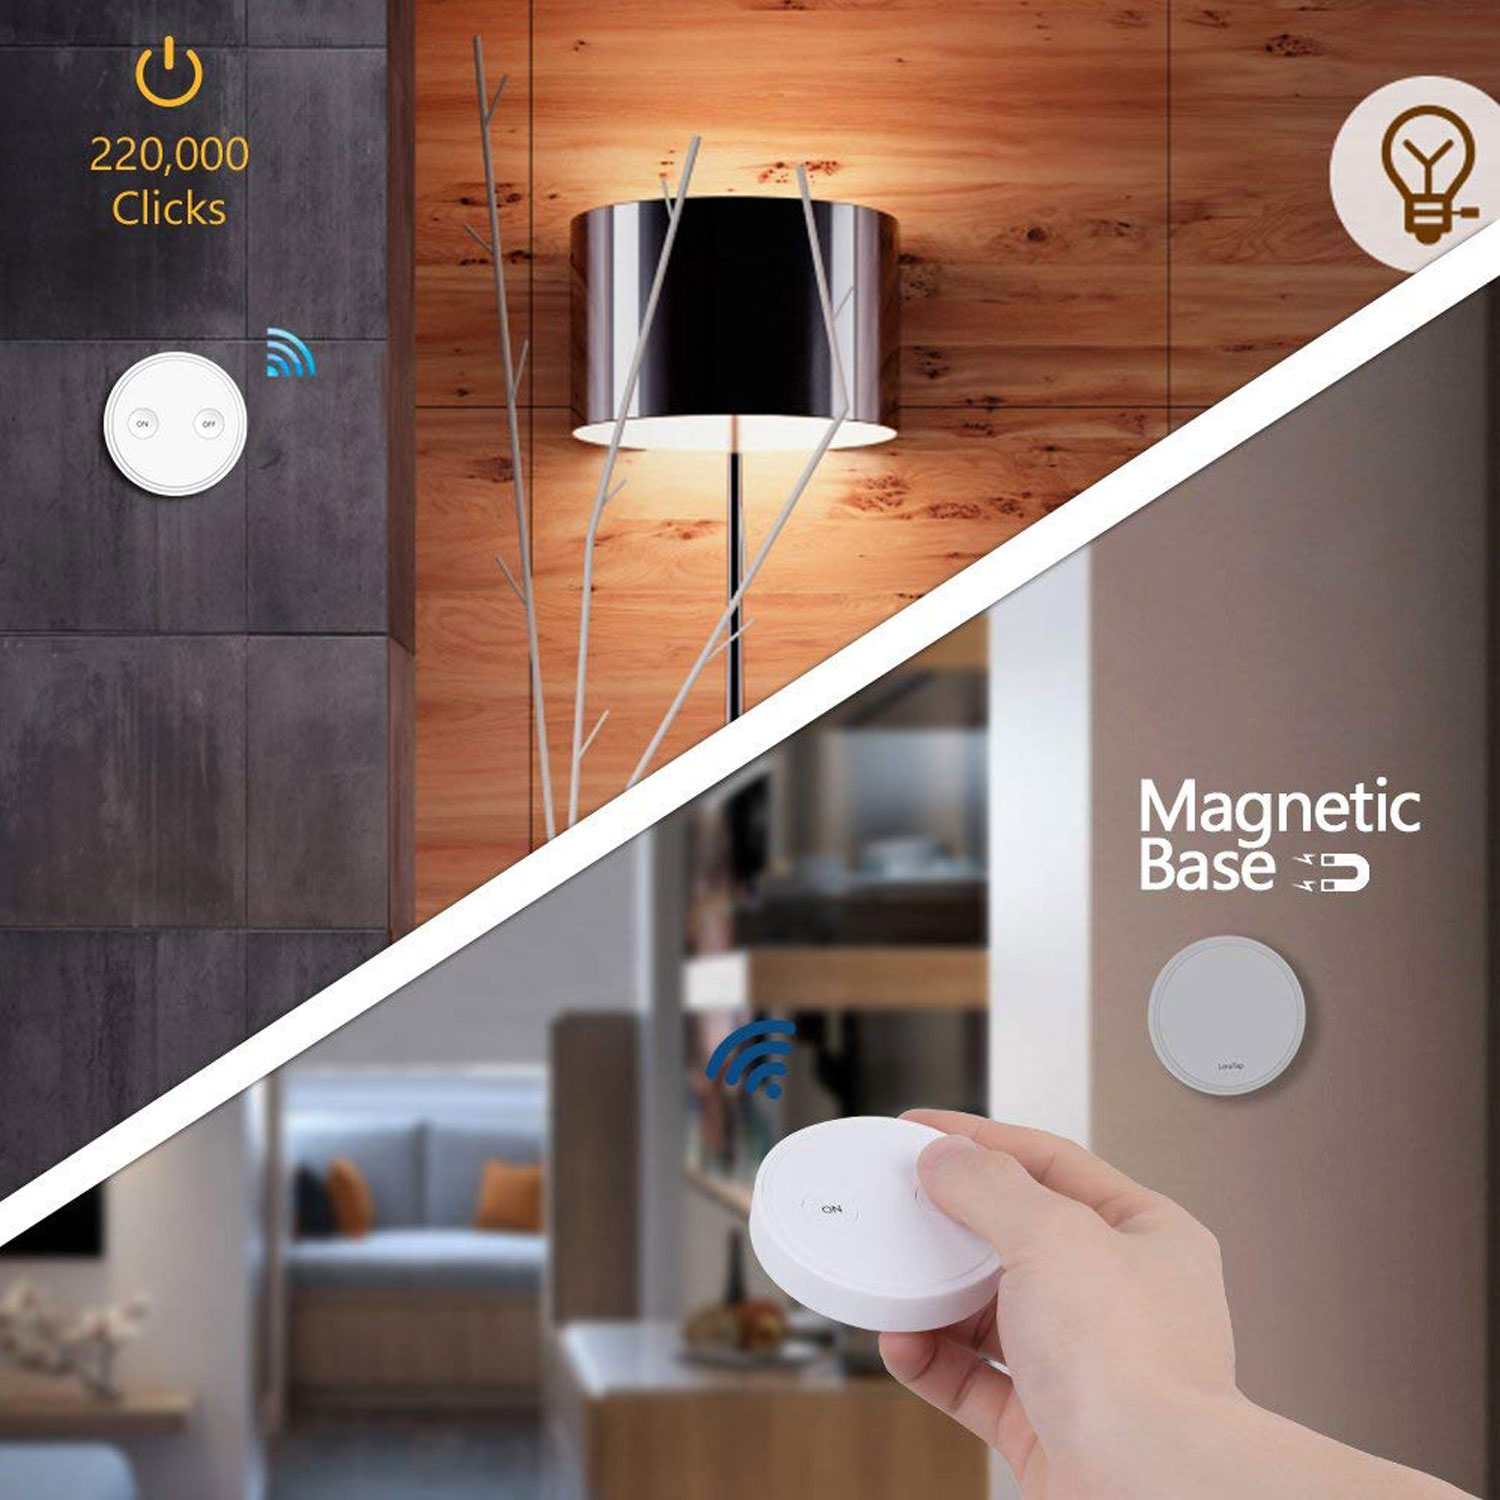 Remote Control Wireless Light Switch With Tiny Relay Module 2500w Magnetic  Wall Switch Or Be Portable 200m Range Easy To Install - Switches -  AliExpress